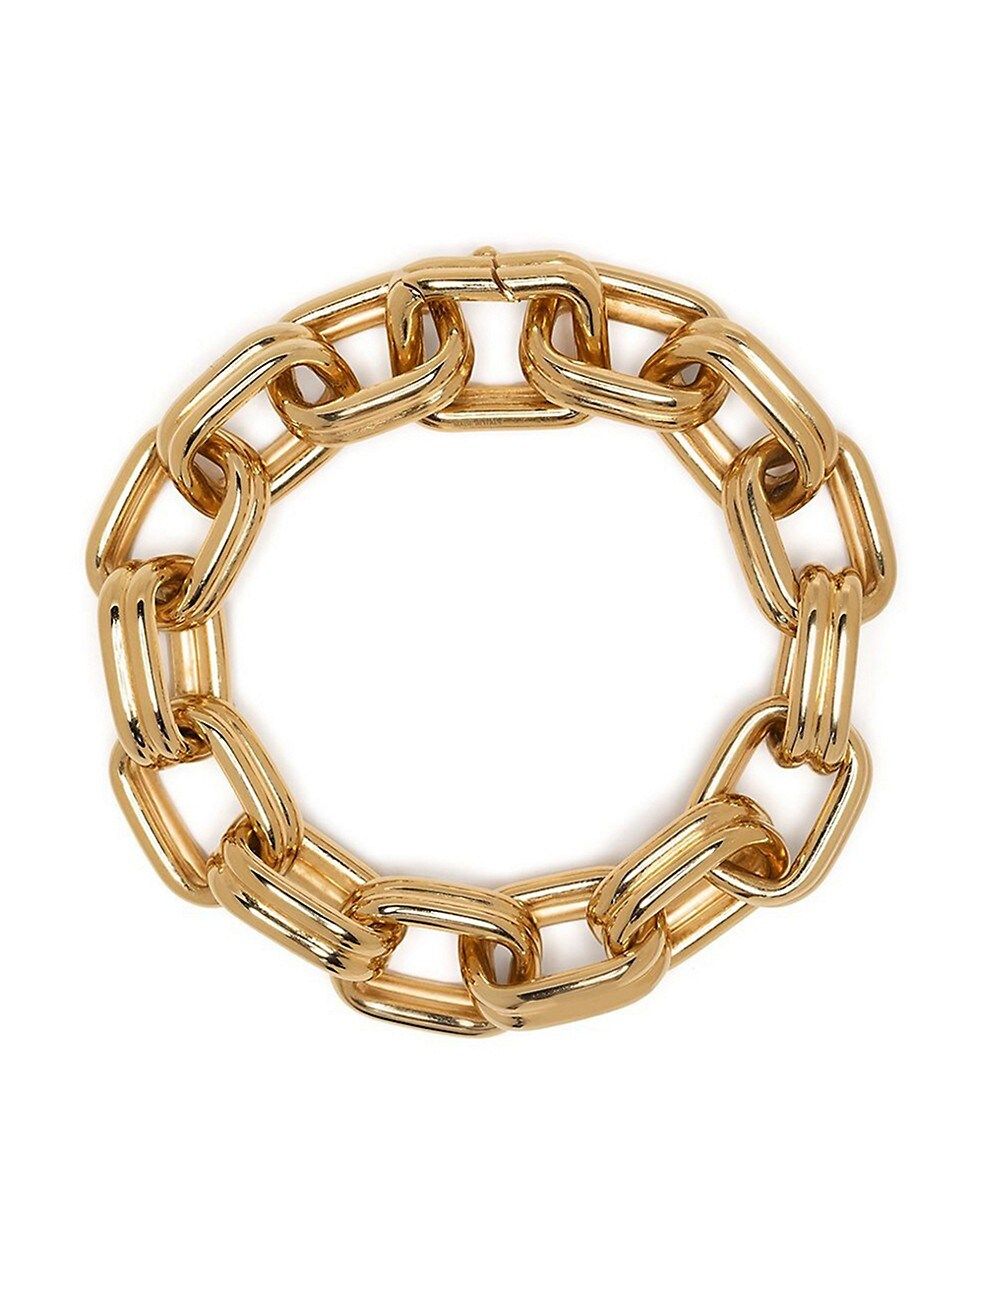 IVI Toy 18K-Gold-Plated Chain Bracelet | Saks Fifth Avenue